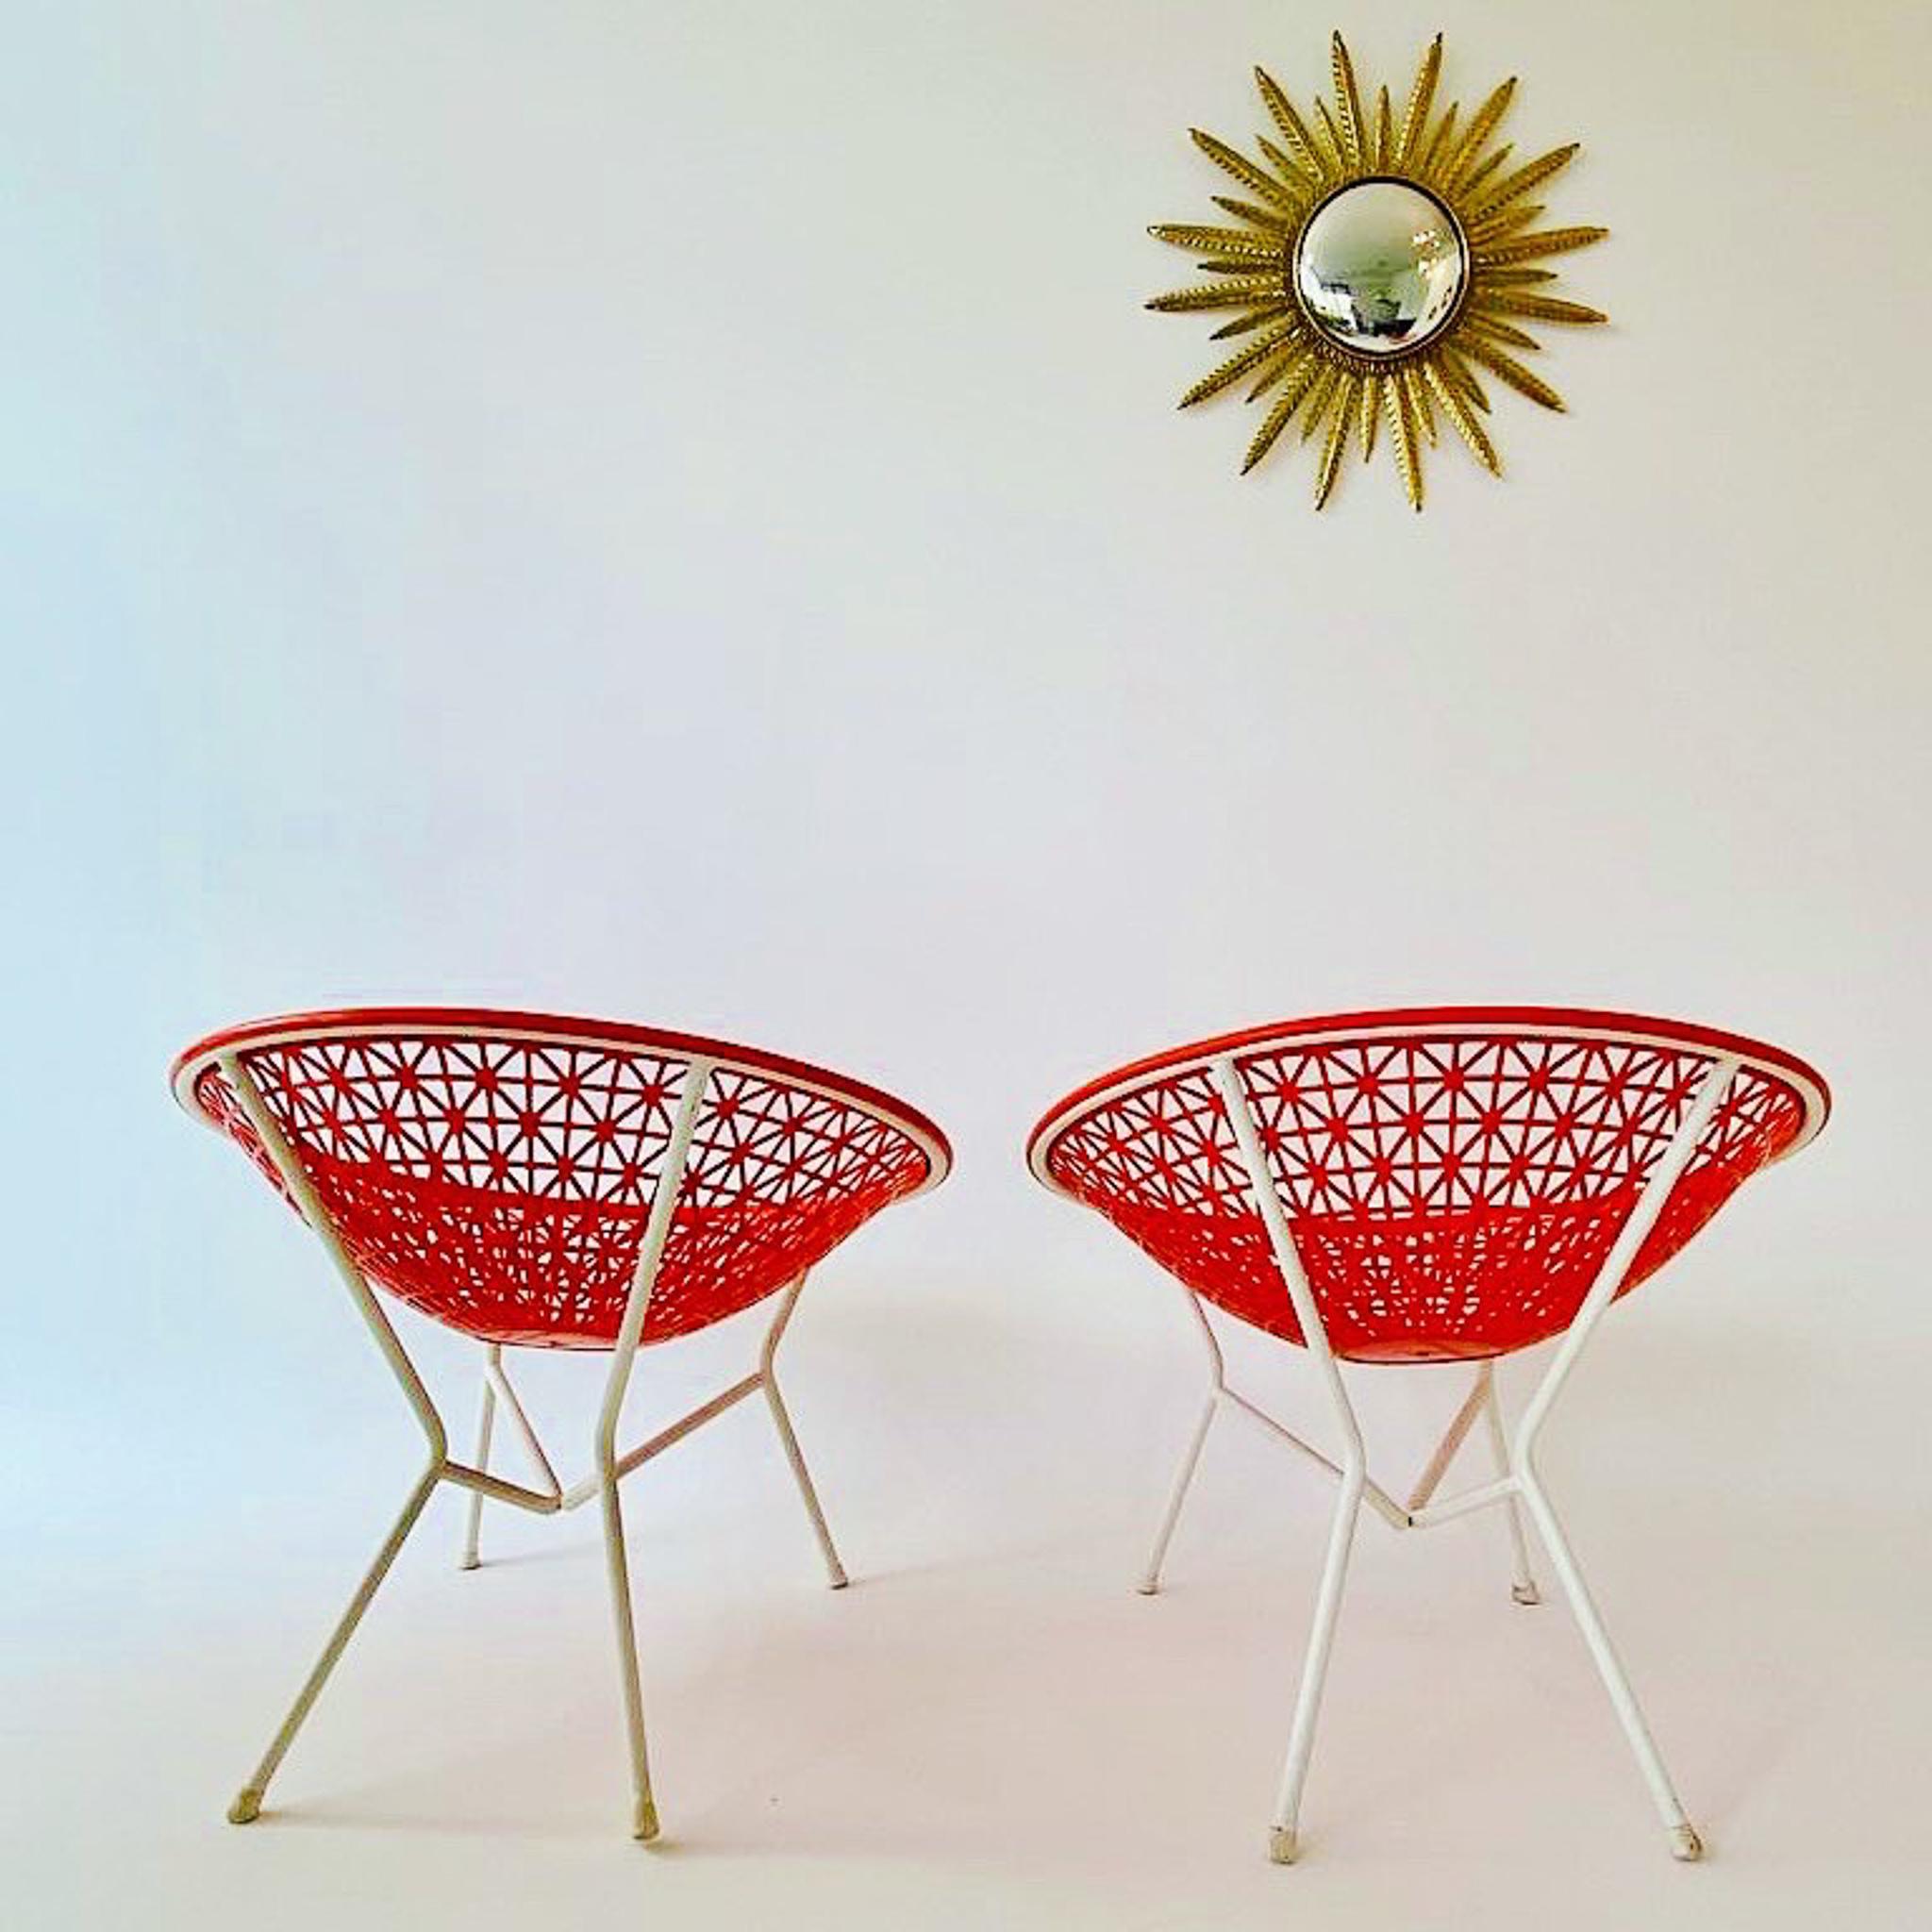 Late 20th Century Mid-Century Modern Orange and White Outdoor Lounge Chairs, Italy, 1970s For Sale